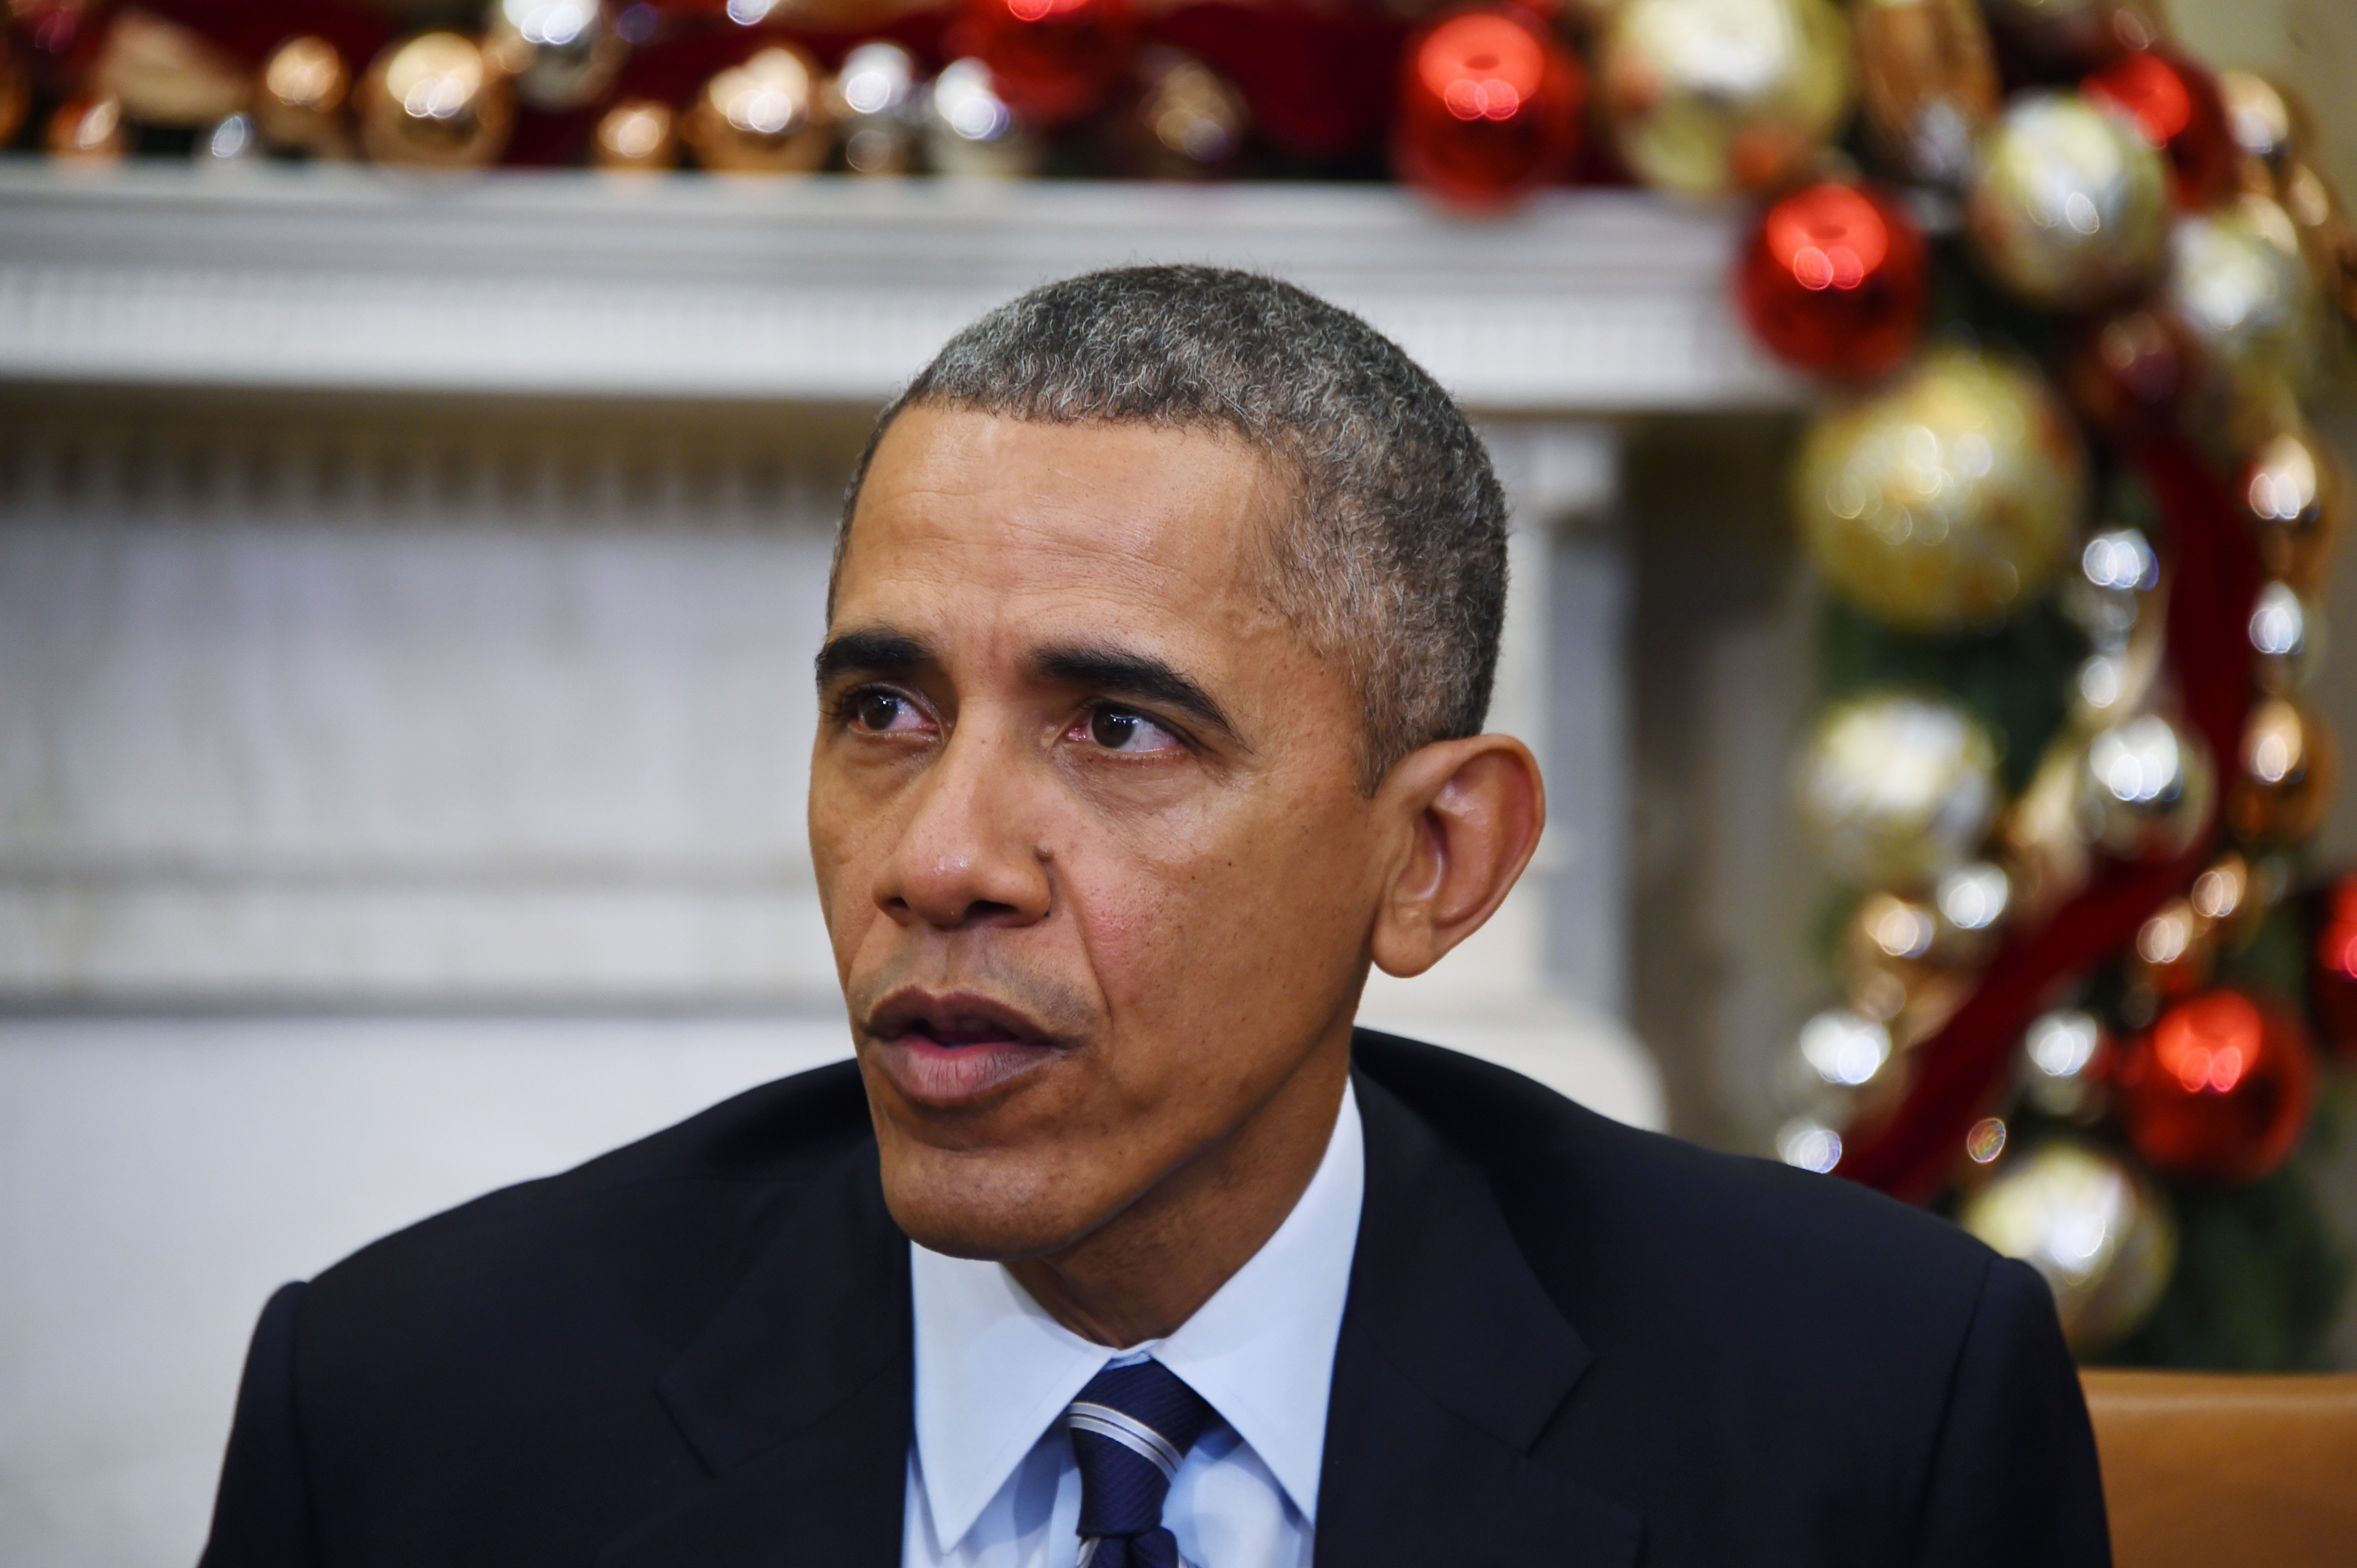 US President Barack Obama speaks about US gun violence at the White House on Dec. 3, (Jim Watson—Getty Images)